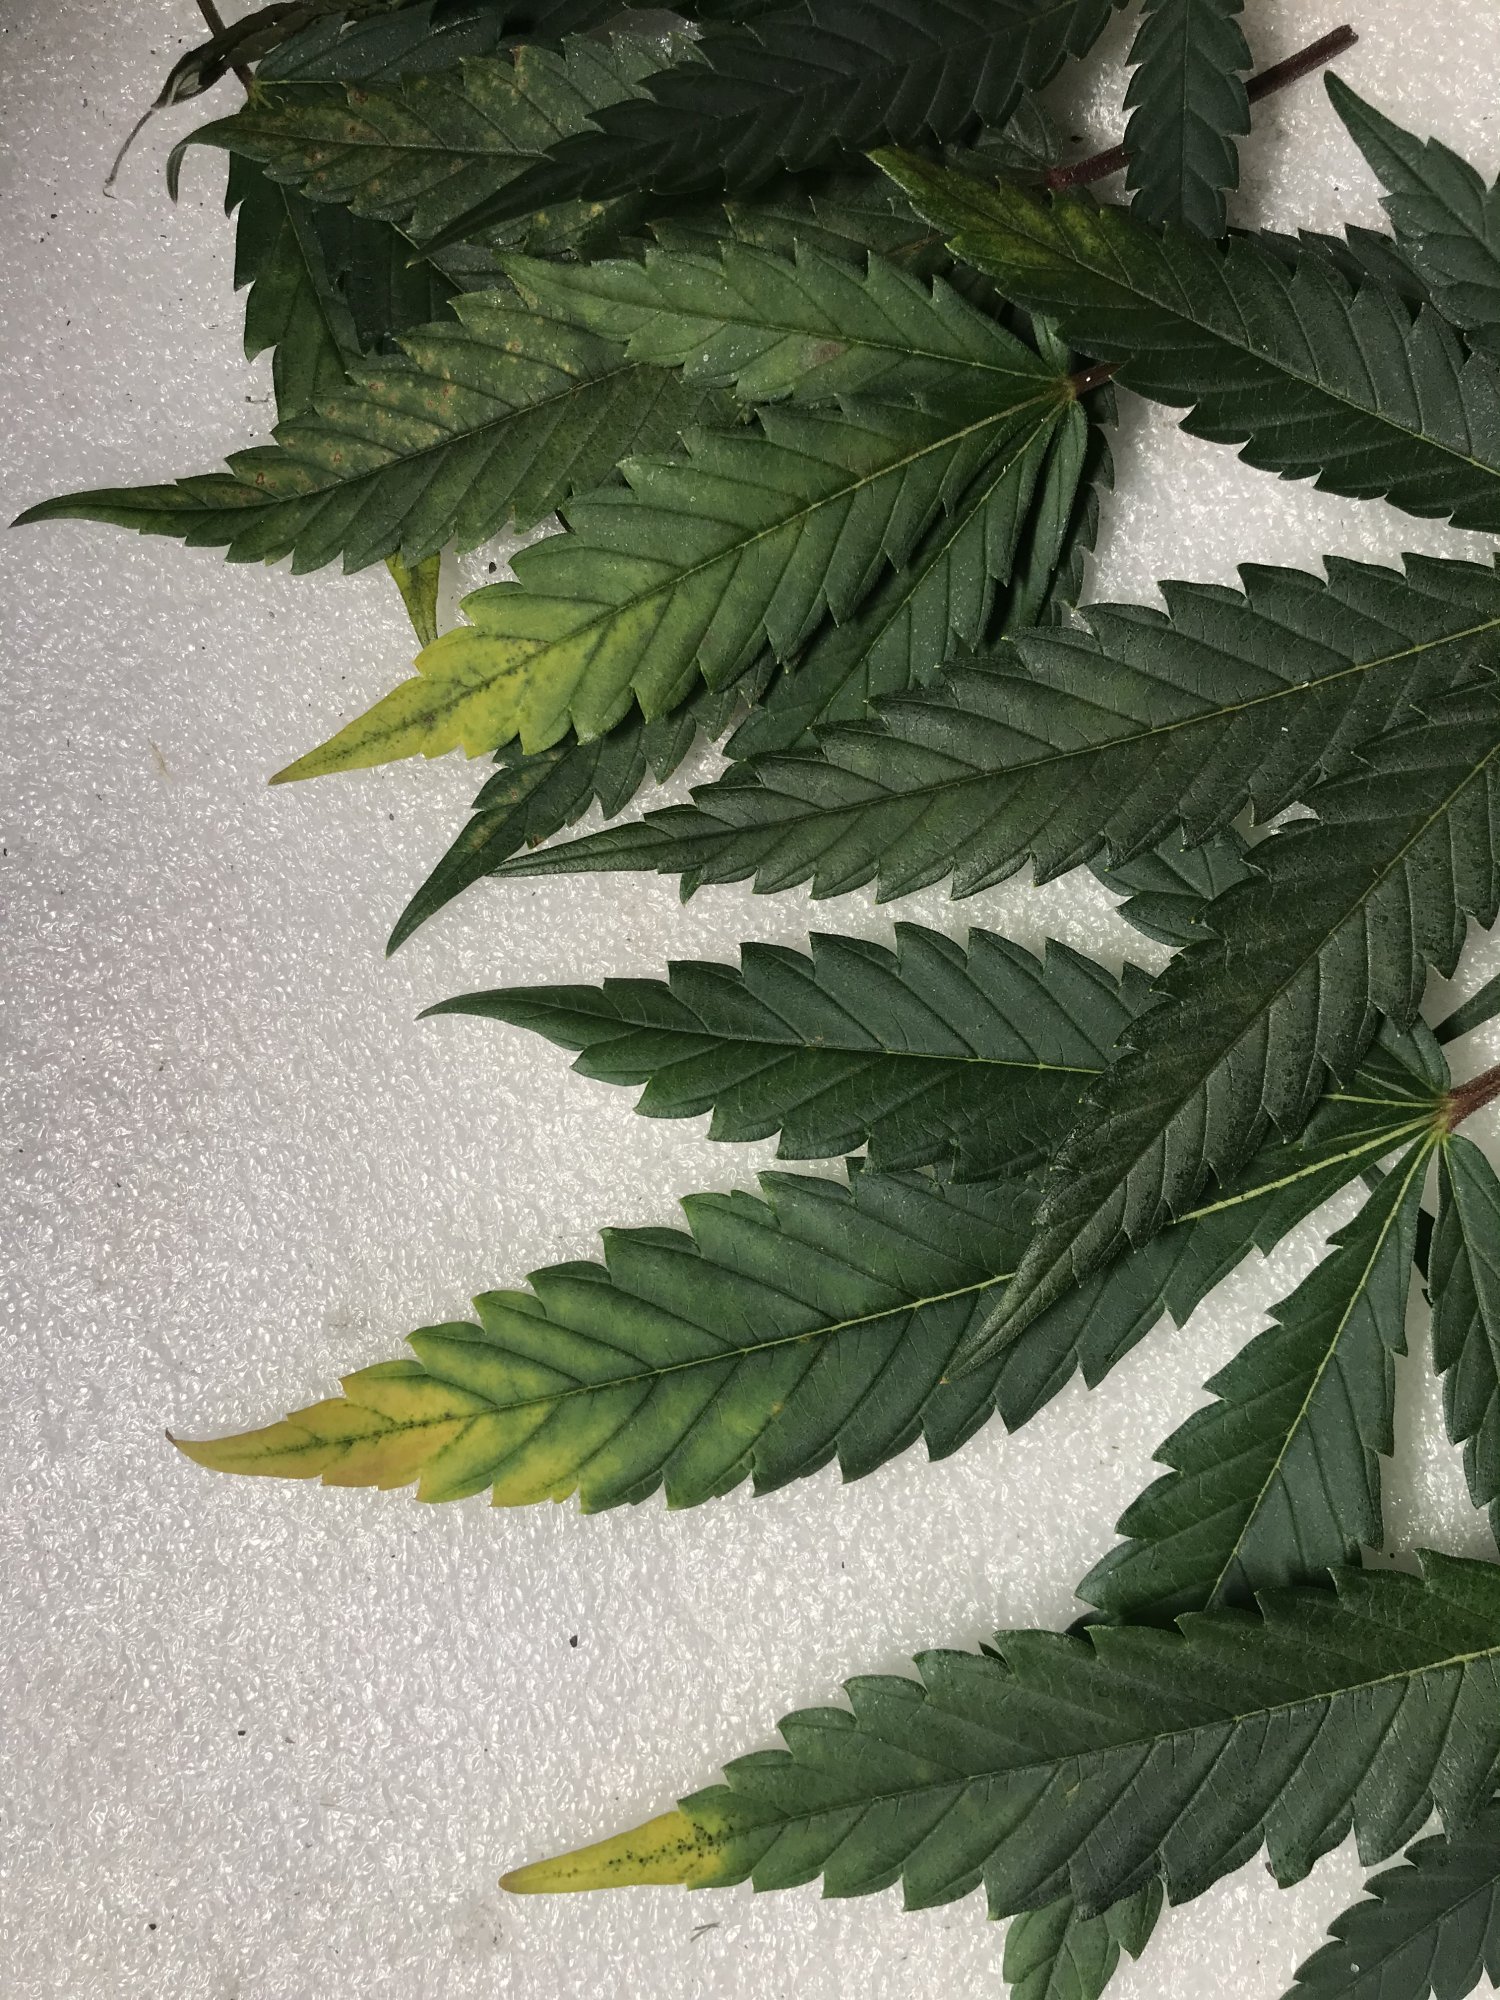 Yellowing tips on lower leaves whats my likely problem